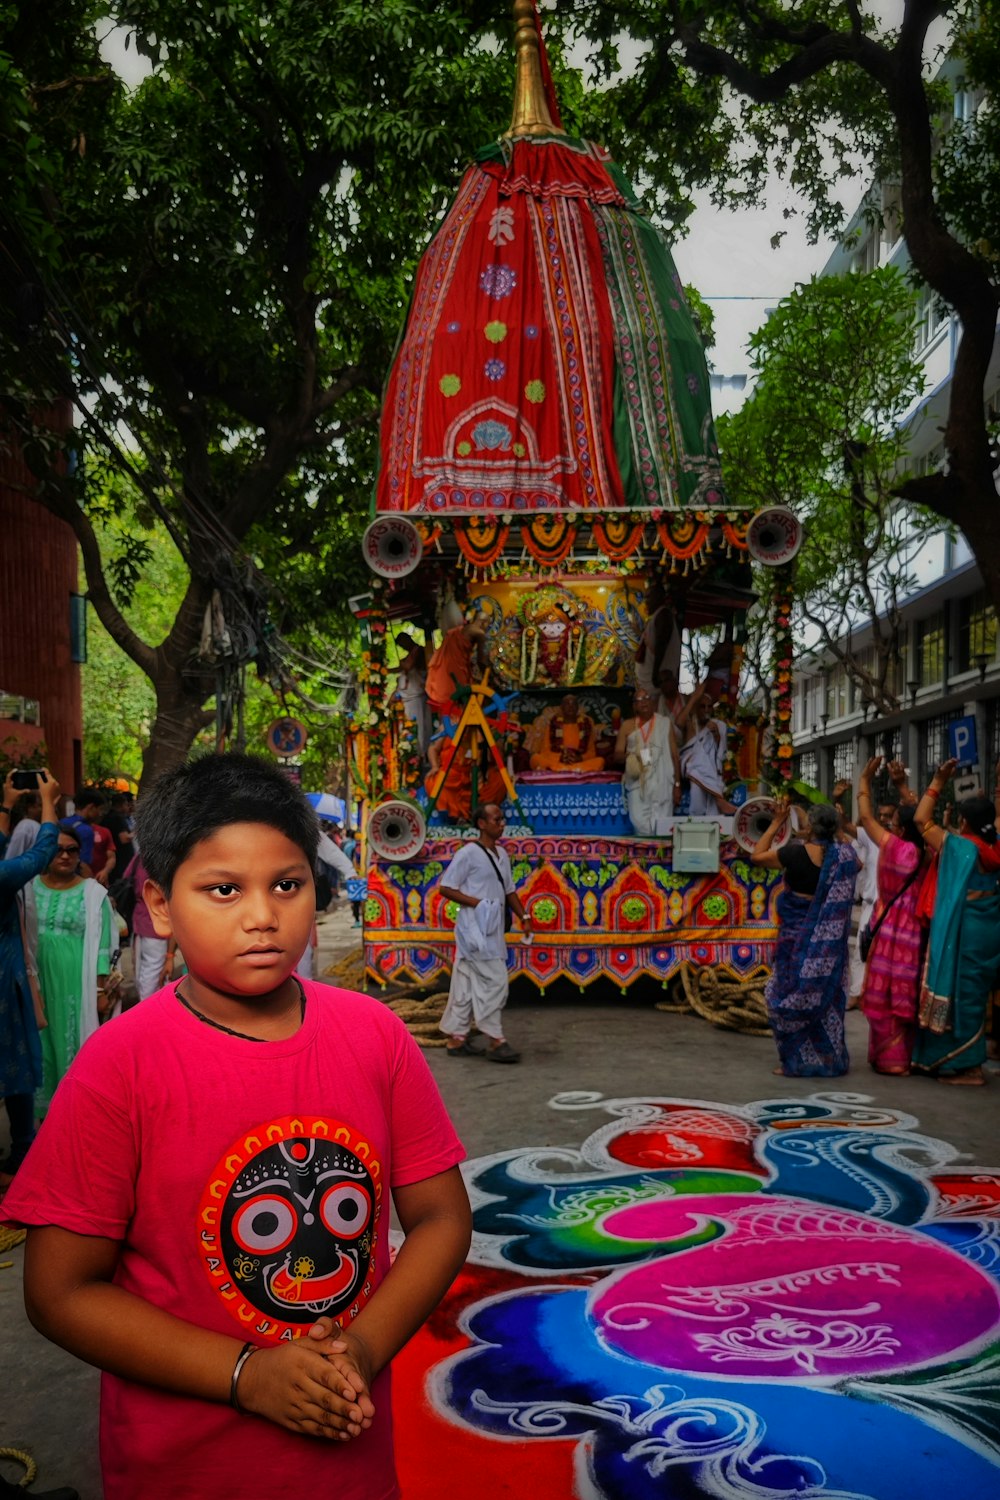 a young boy standing in front of a colorful float